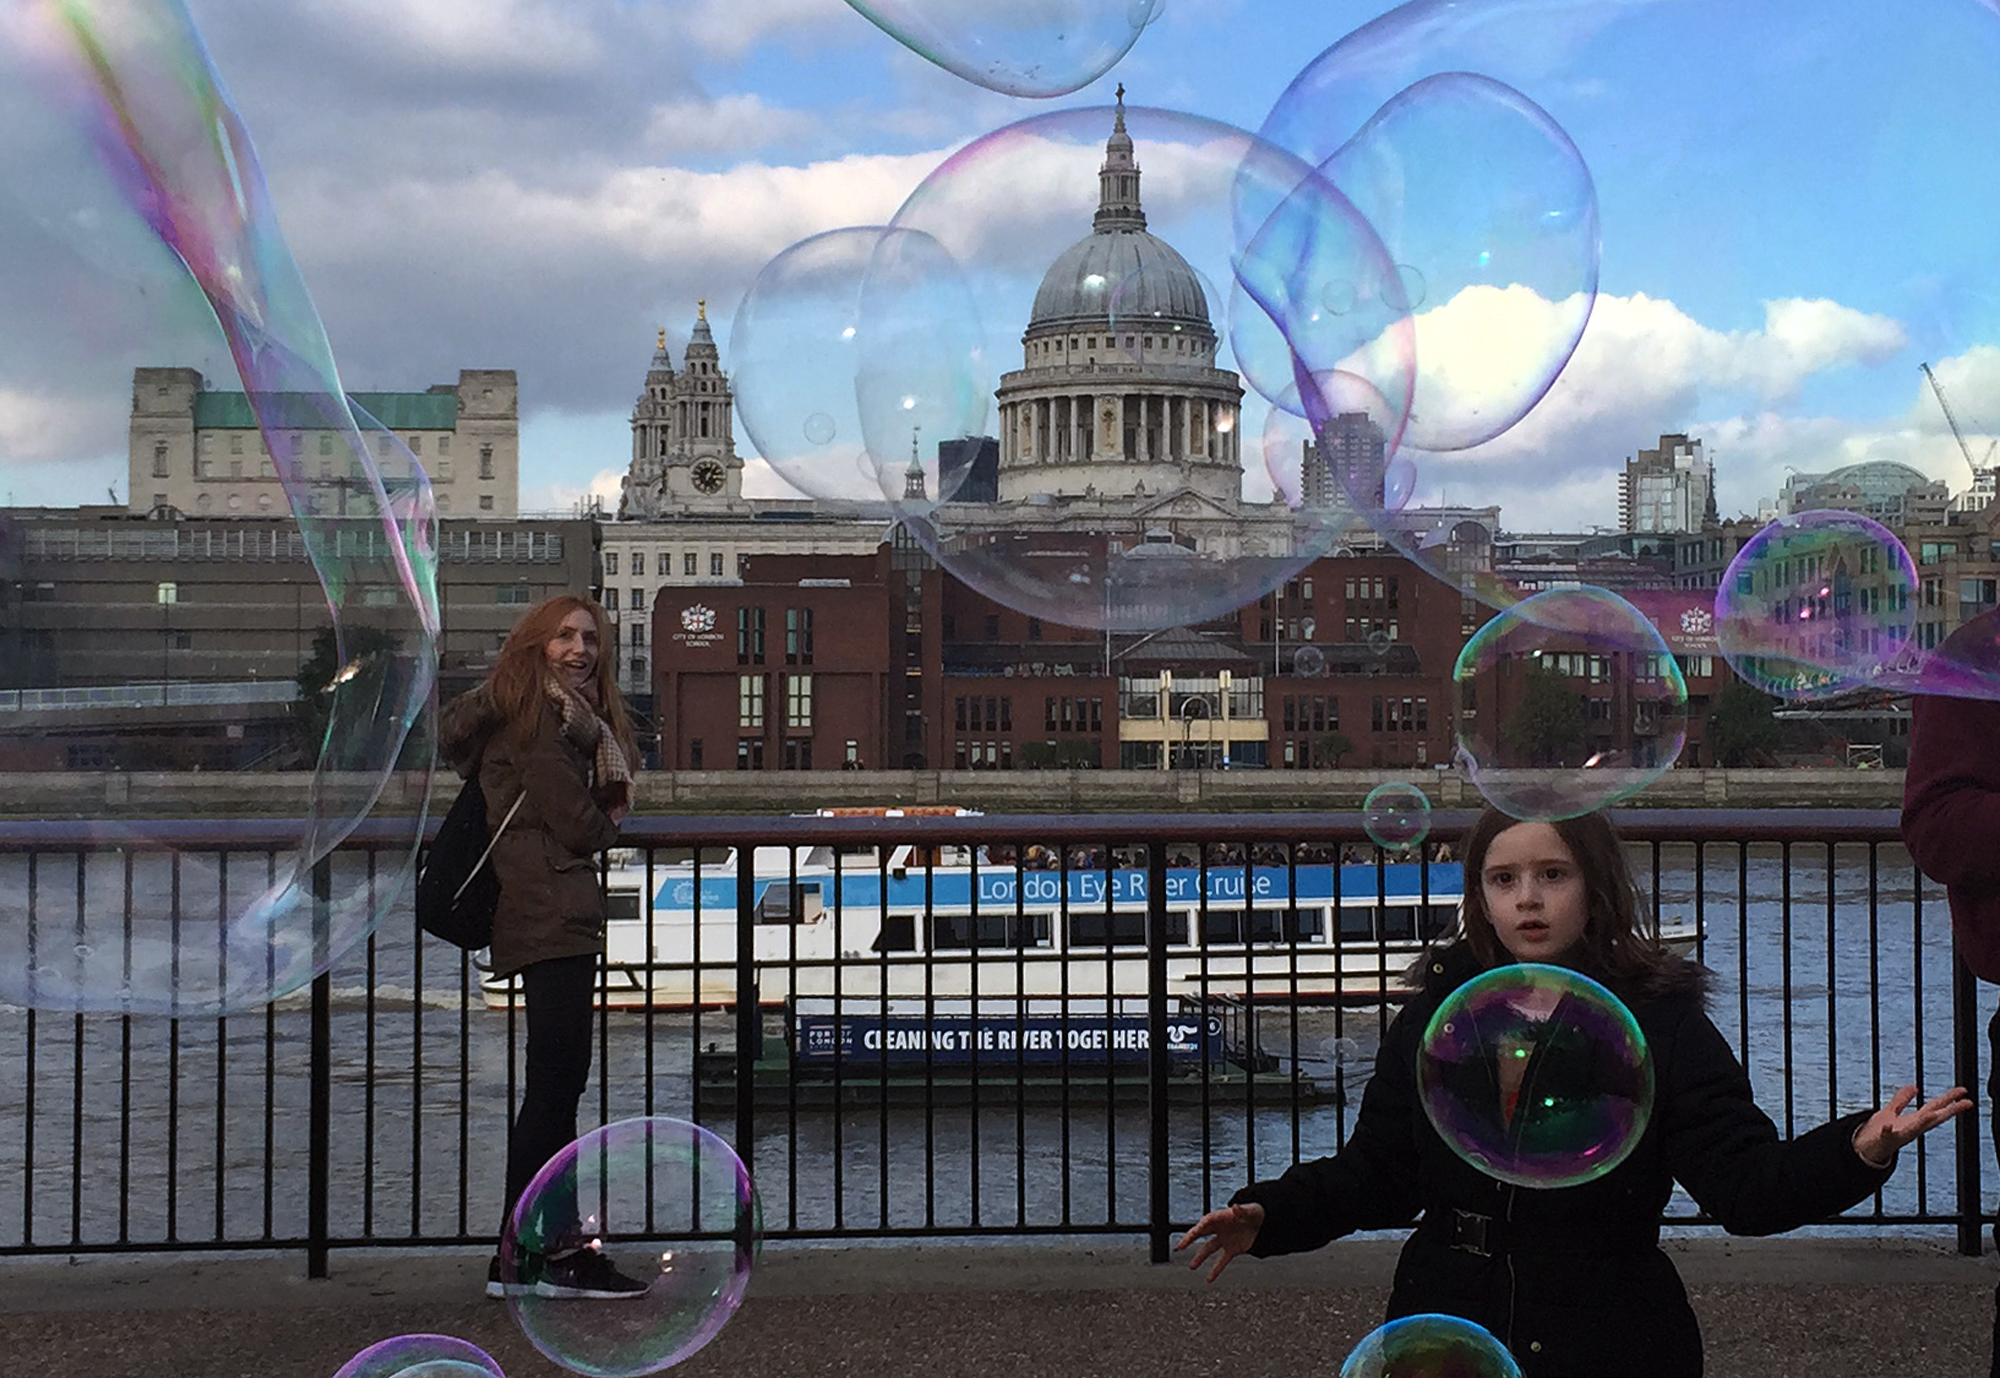 Tourists watch soap bubbles along the Thames river, London, backdropped by St. Paul's Cathedral, Tuesday, Oct. 20, 2015. (AP Photo/Christophe Ena)